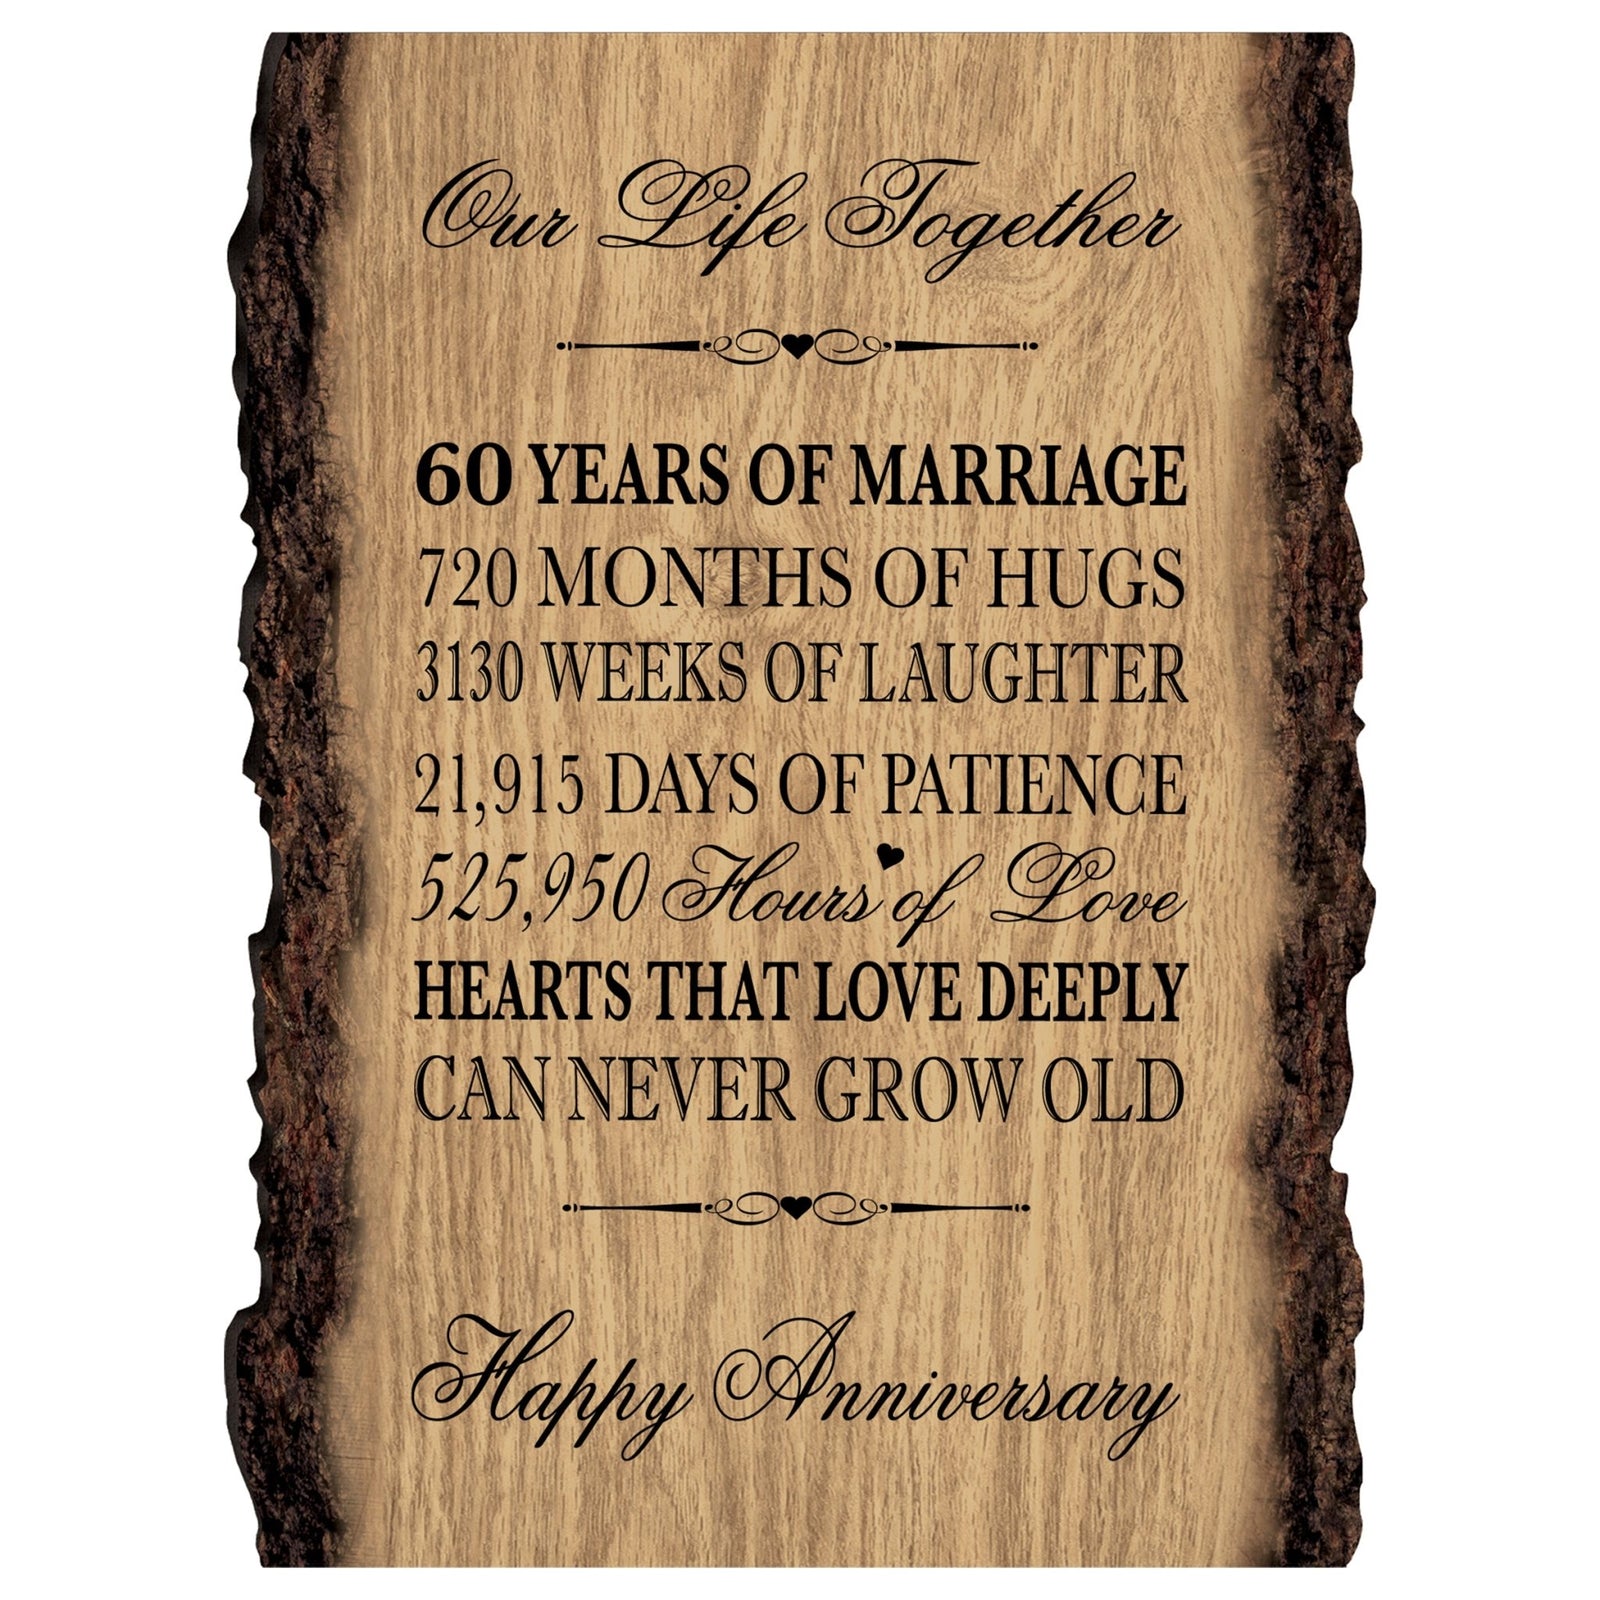 Rustic Wedding Anniversary 9x12 Barky Wall Plaque Gift For Parents, Grandparents New Couple - 60 Years Of Marriage - LifeSong Milestones